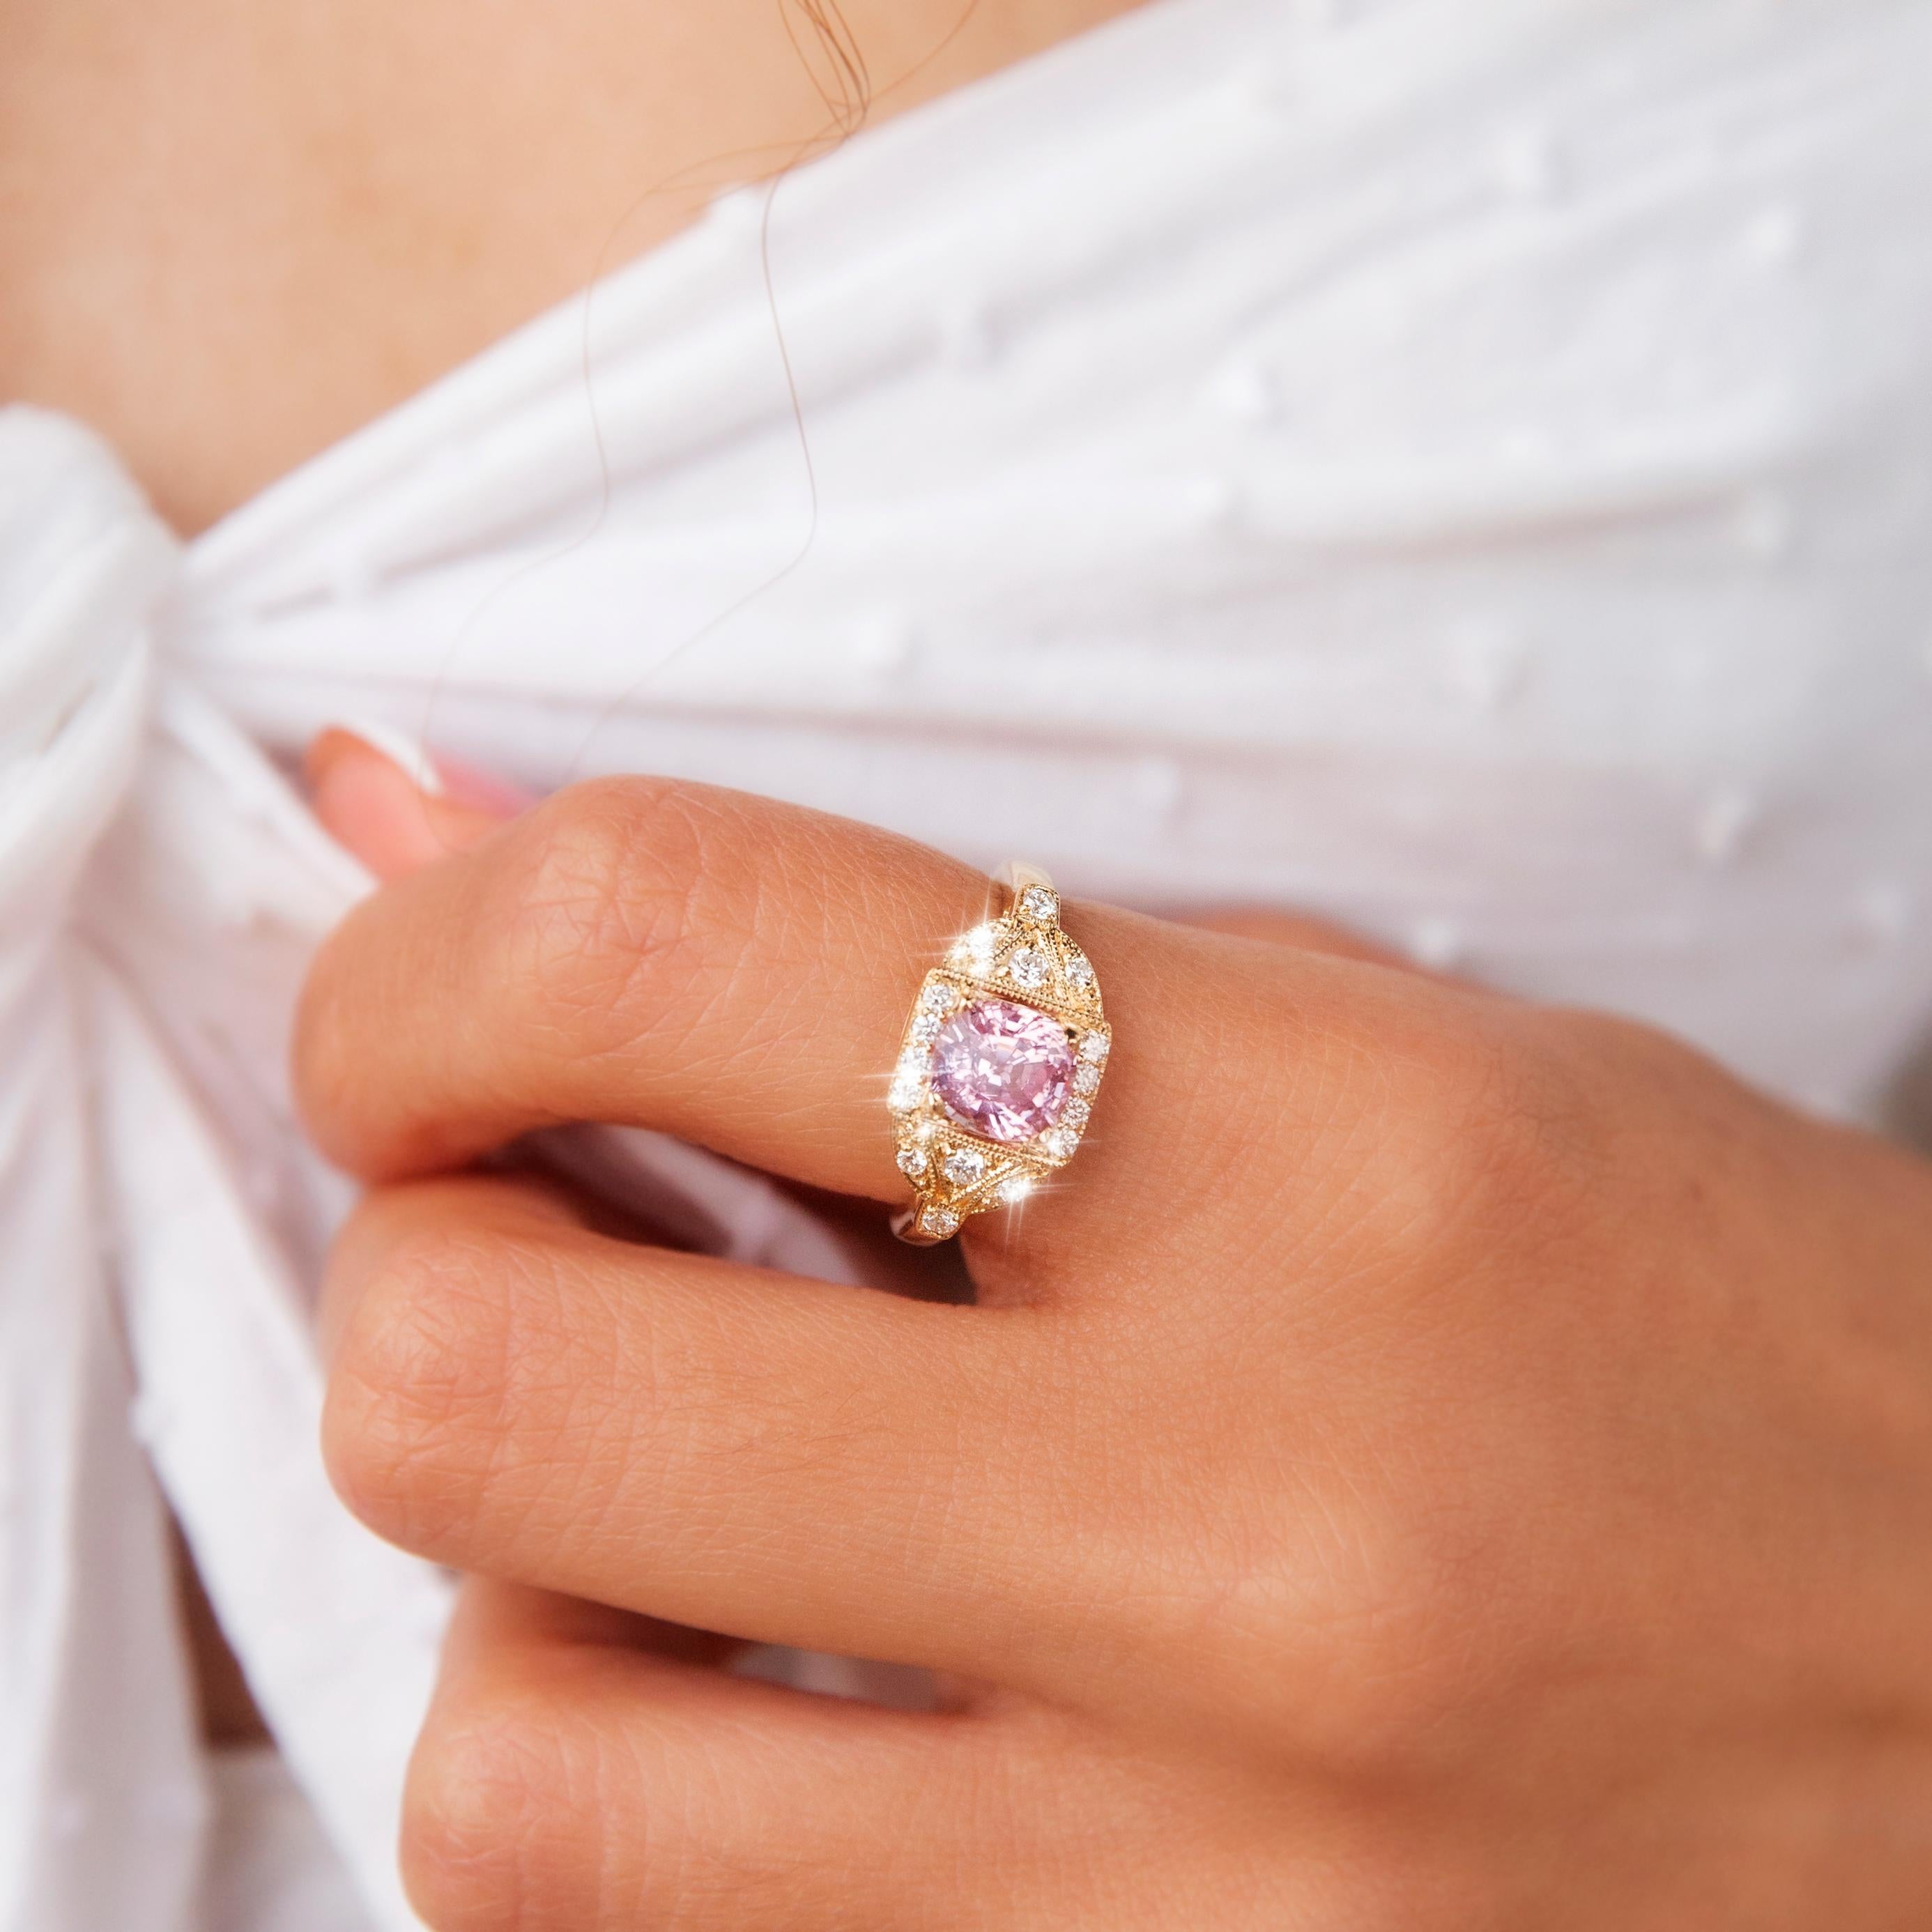 Forged in 18 carat yellow gold, this opulent contemporary cluster ring features an enchanting round cut light pink spinel in an elaborate diamond-encrusted milgrain bead setting. She has been named The Mariah Ring. Her classic design makes her a